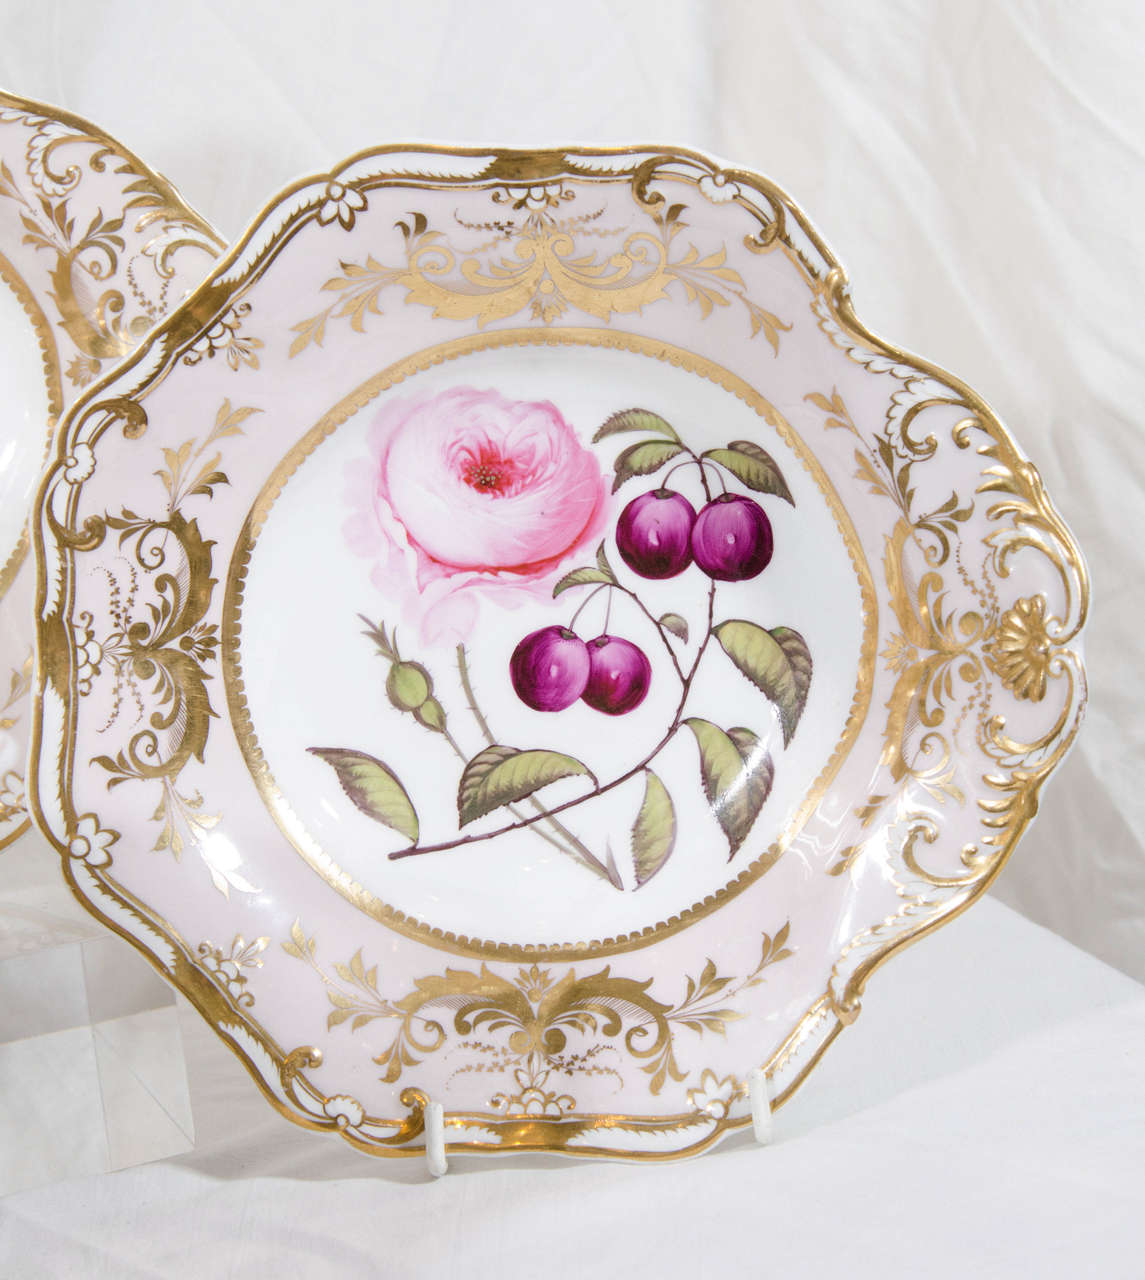 A lovely large oval shaped centerpiece decorated with well painted fruits, flowers and lavish gilt  (see image #7 for an image of the interior). Together with four matching shell shaped dishes. The centerpiece measures 14.25